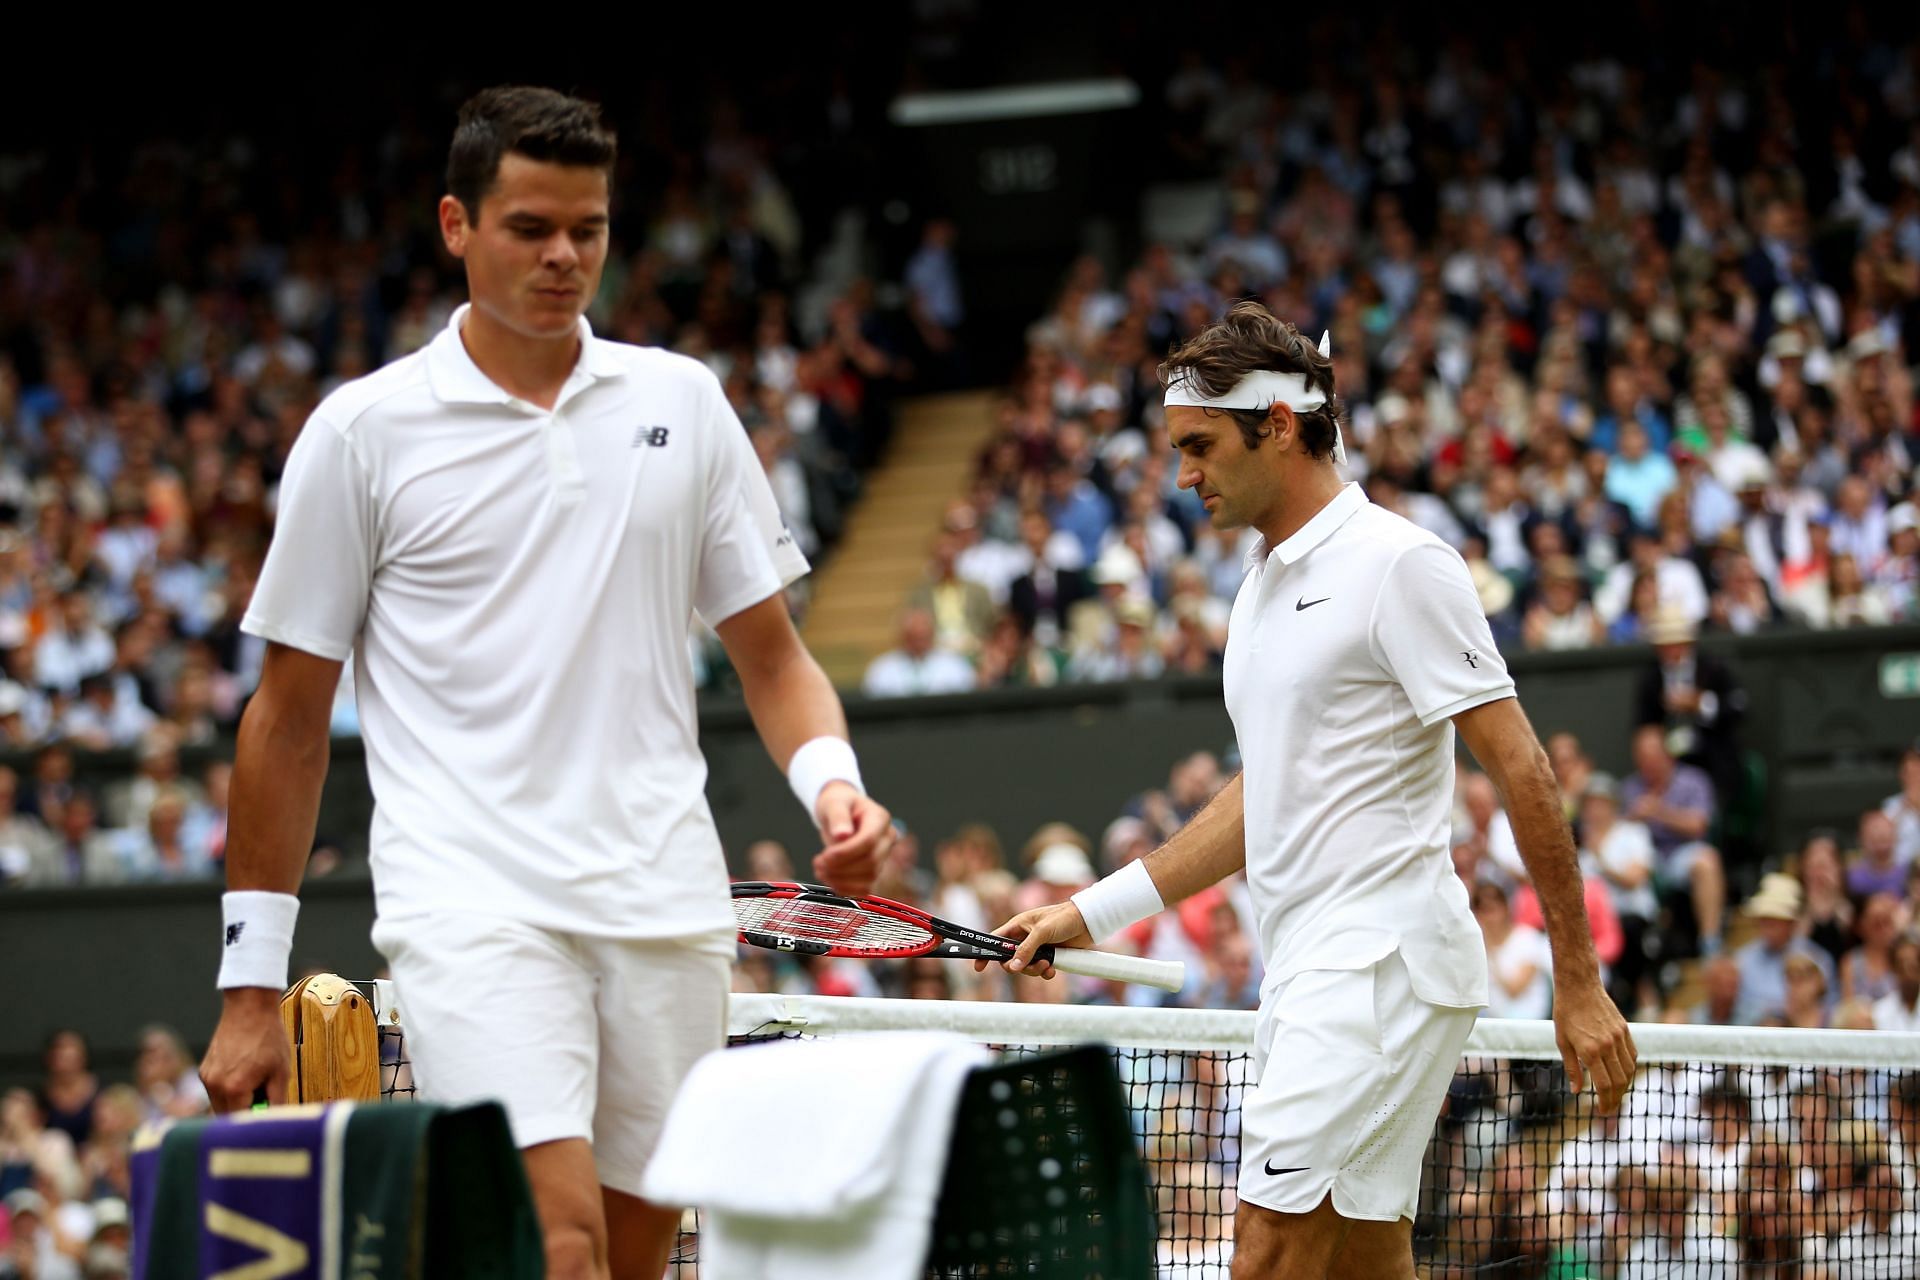 Raonic caused a stir by beating Federer at Wimbledon 2016